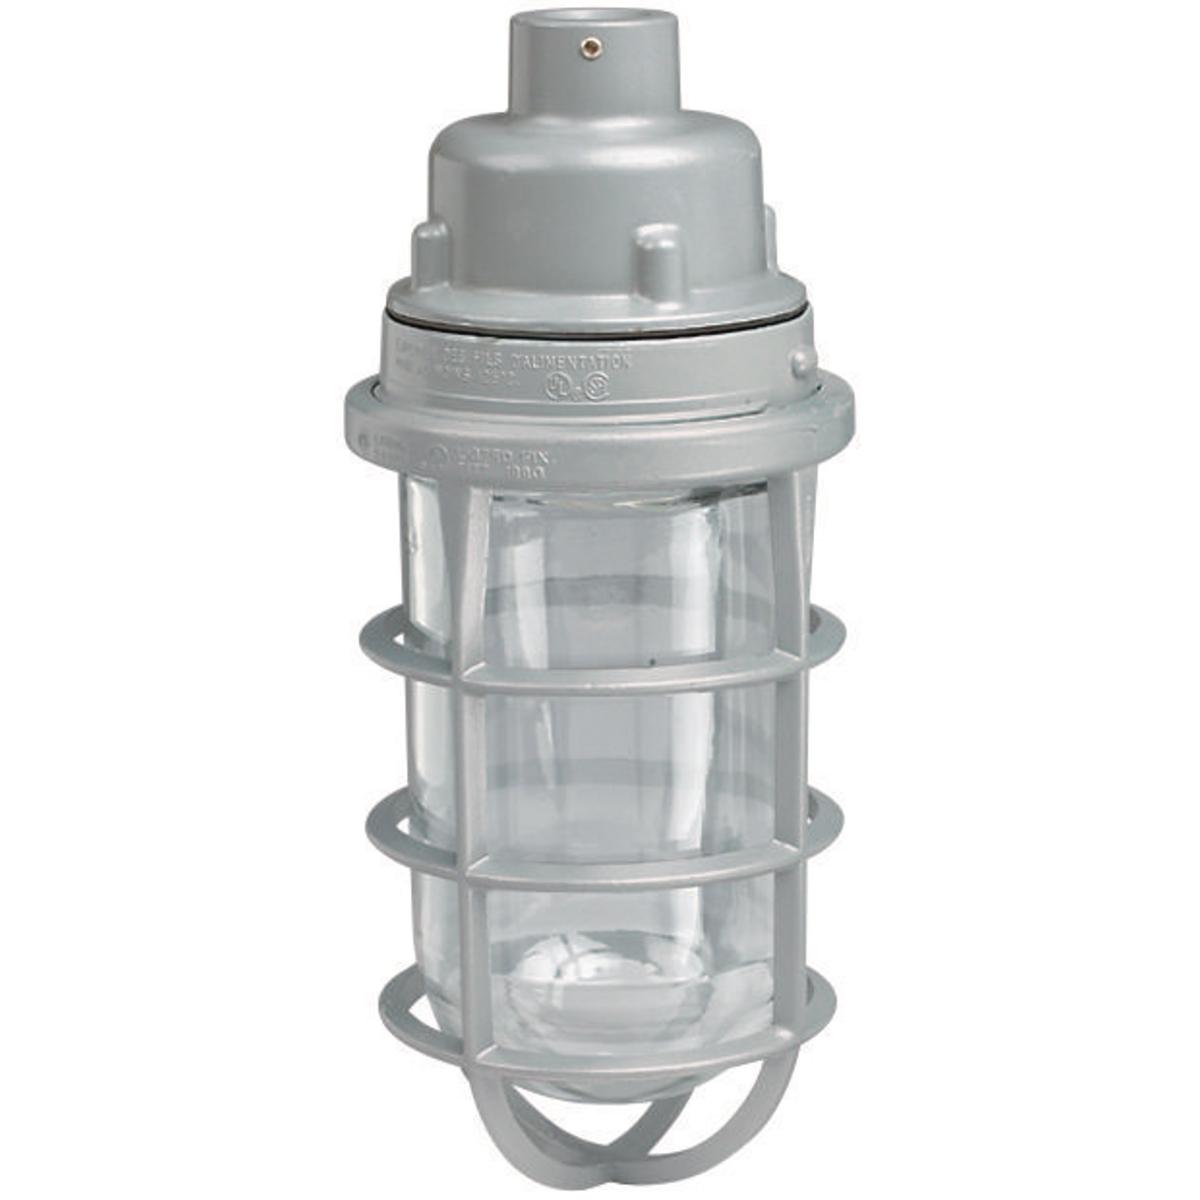 Hubbell VUAGG-1-100 SU104 100W V Series Incandescent - Pendant - 1/2" Hub With Globe and Guard - Unit Pack  ; Electrostatically applied epoxy/polyester finish ; Modular design ; Hubs are threaded for attachment to conduit ; Set screws in pendant fixture ; Copper-free aluminum (les